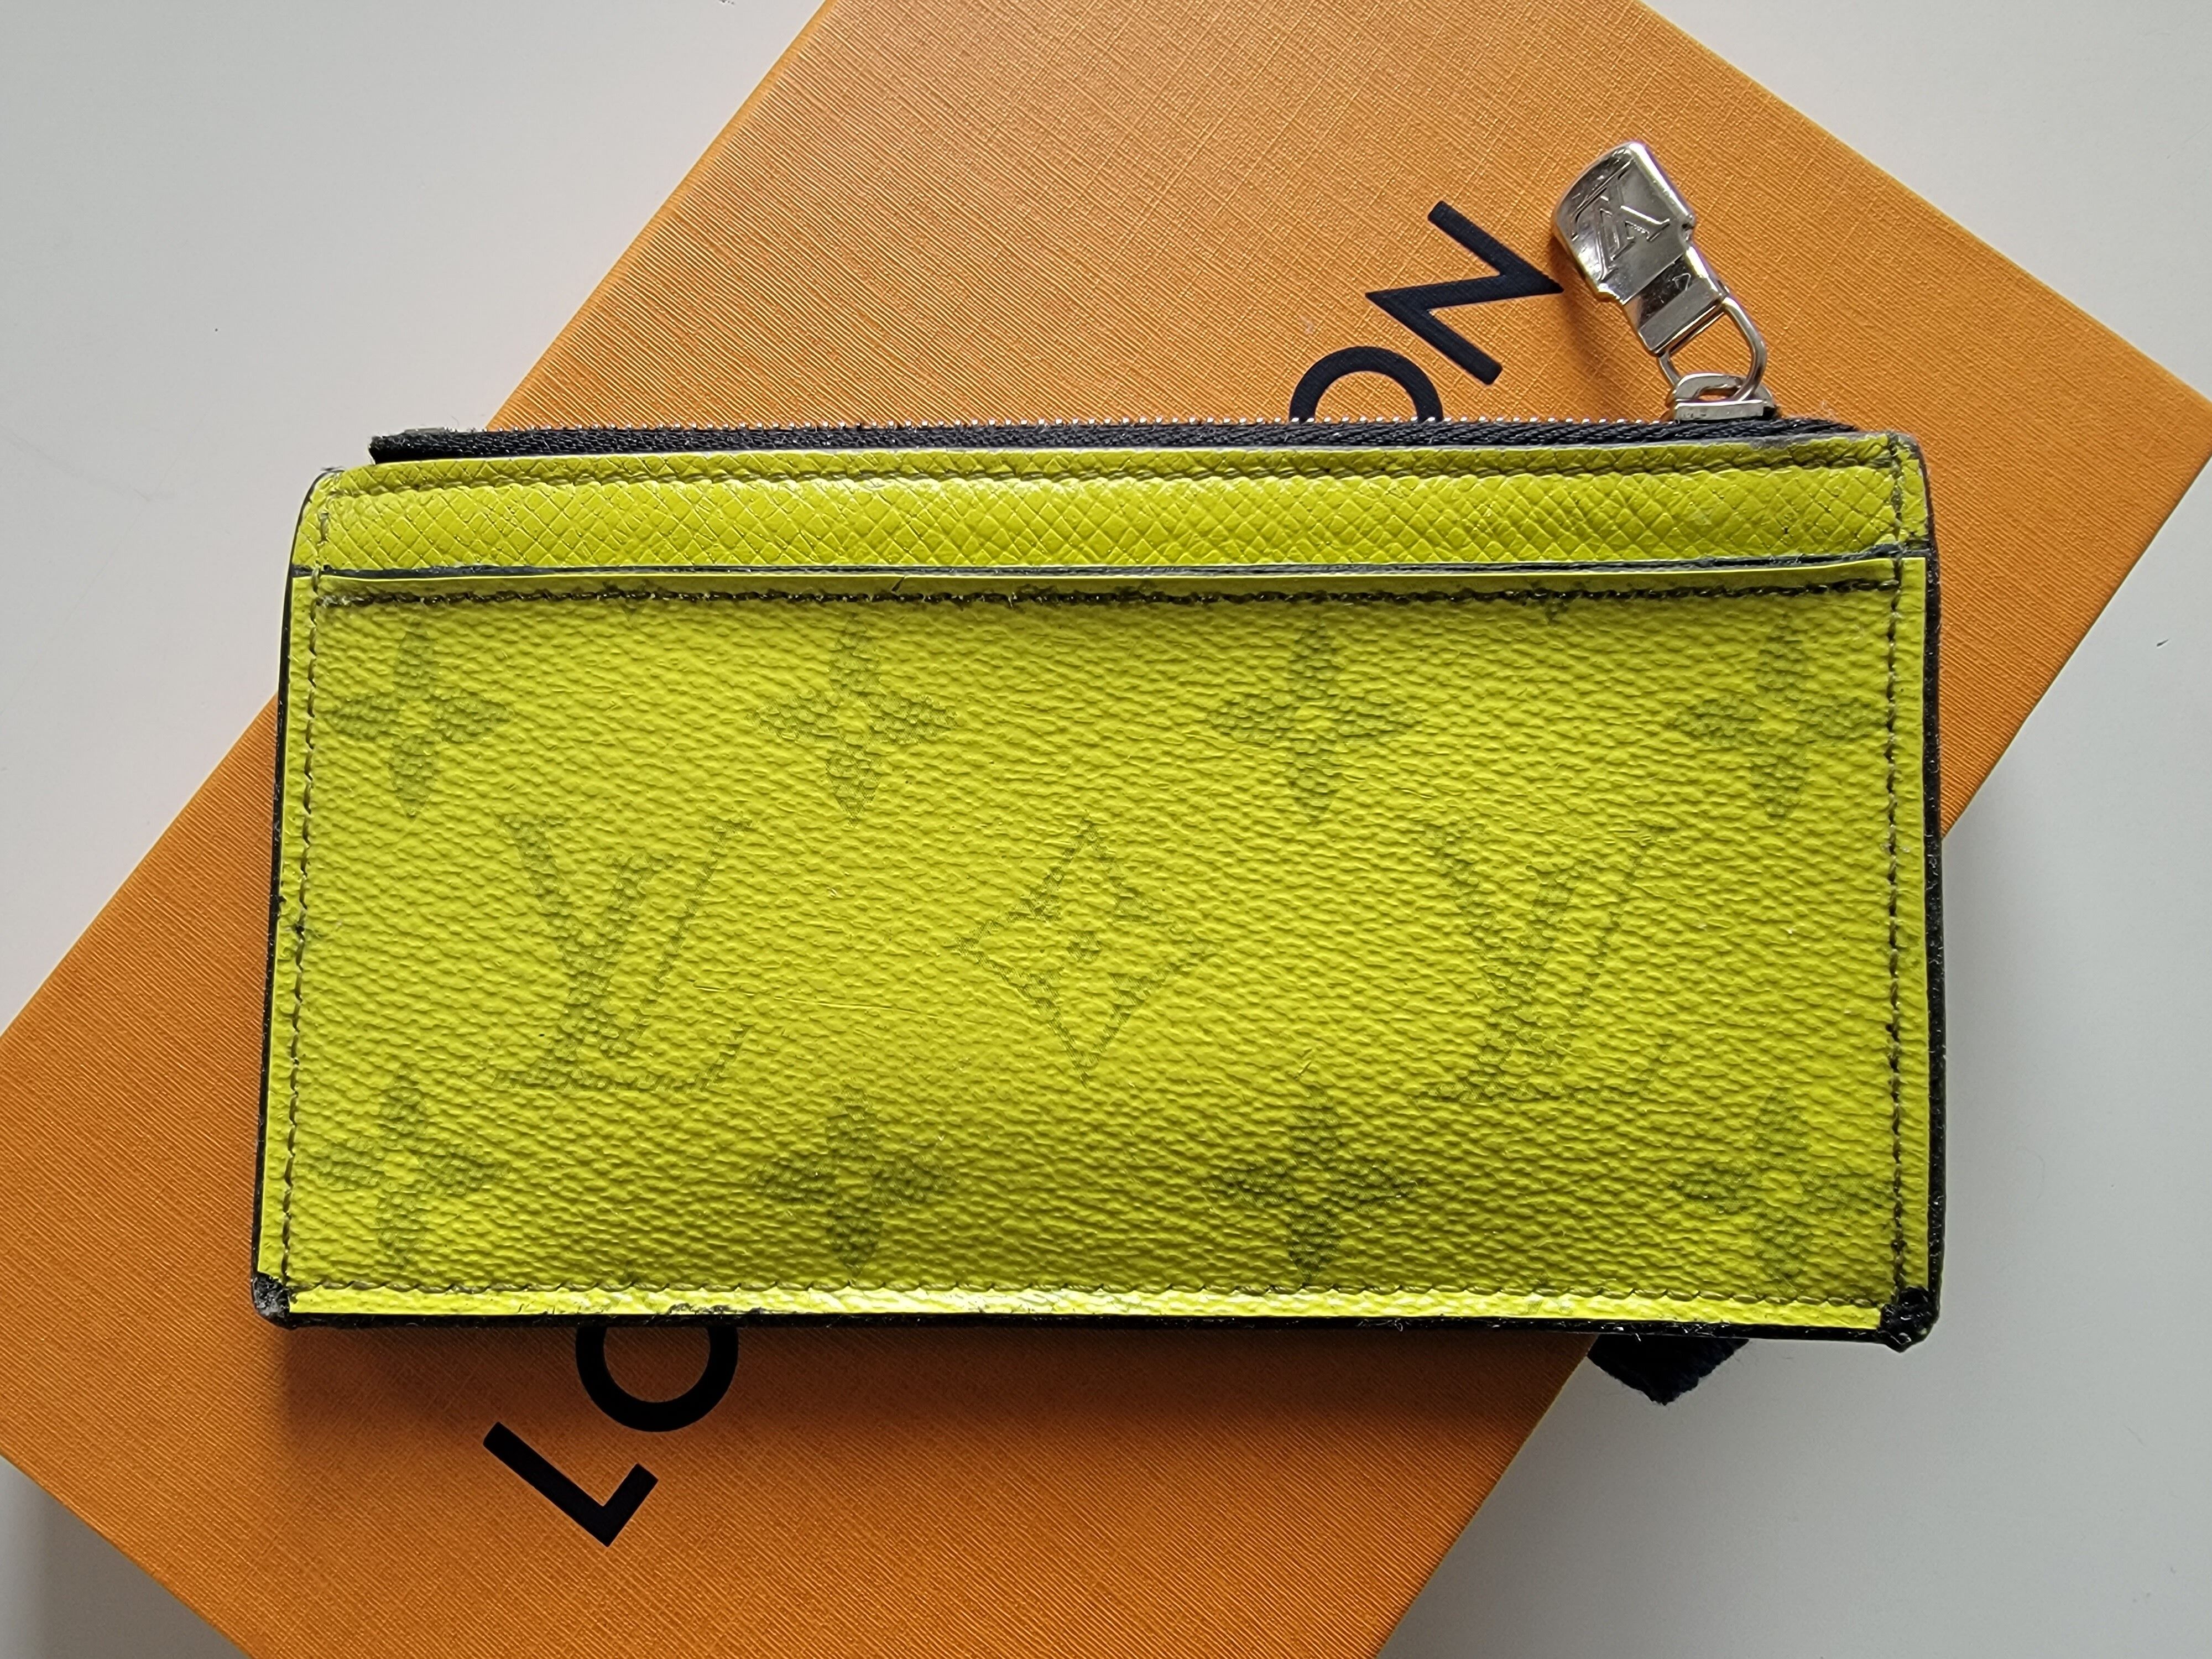 Louis Vuitton M30950 Coin Card Holder , Yellow, One Size